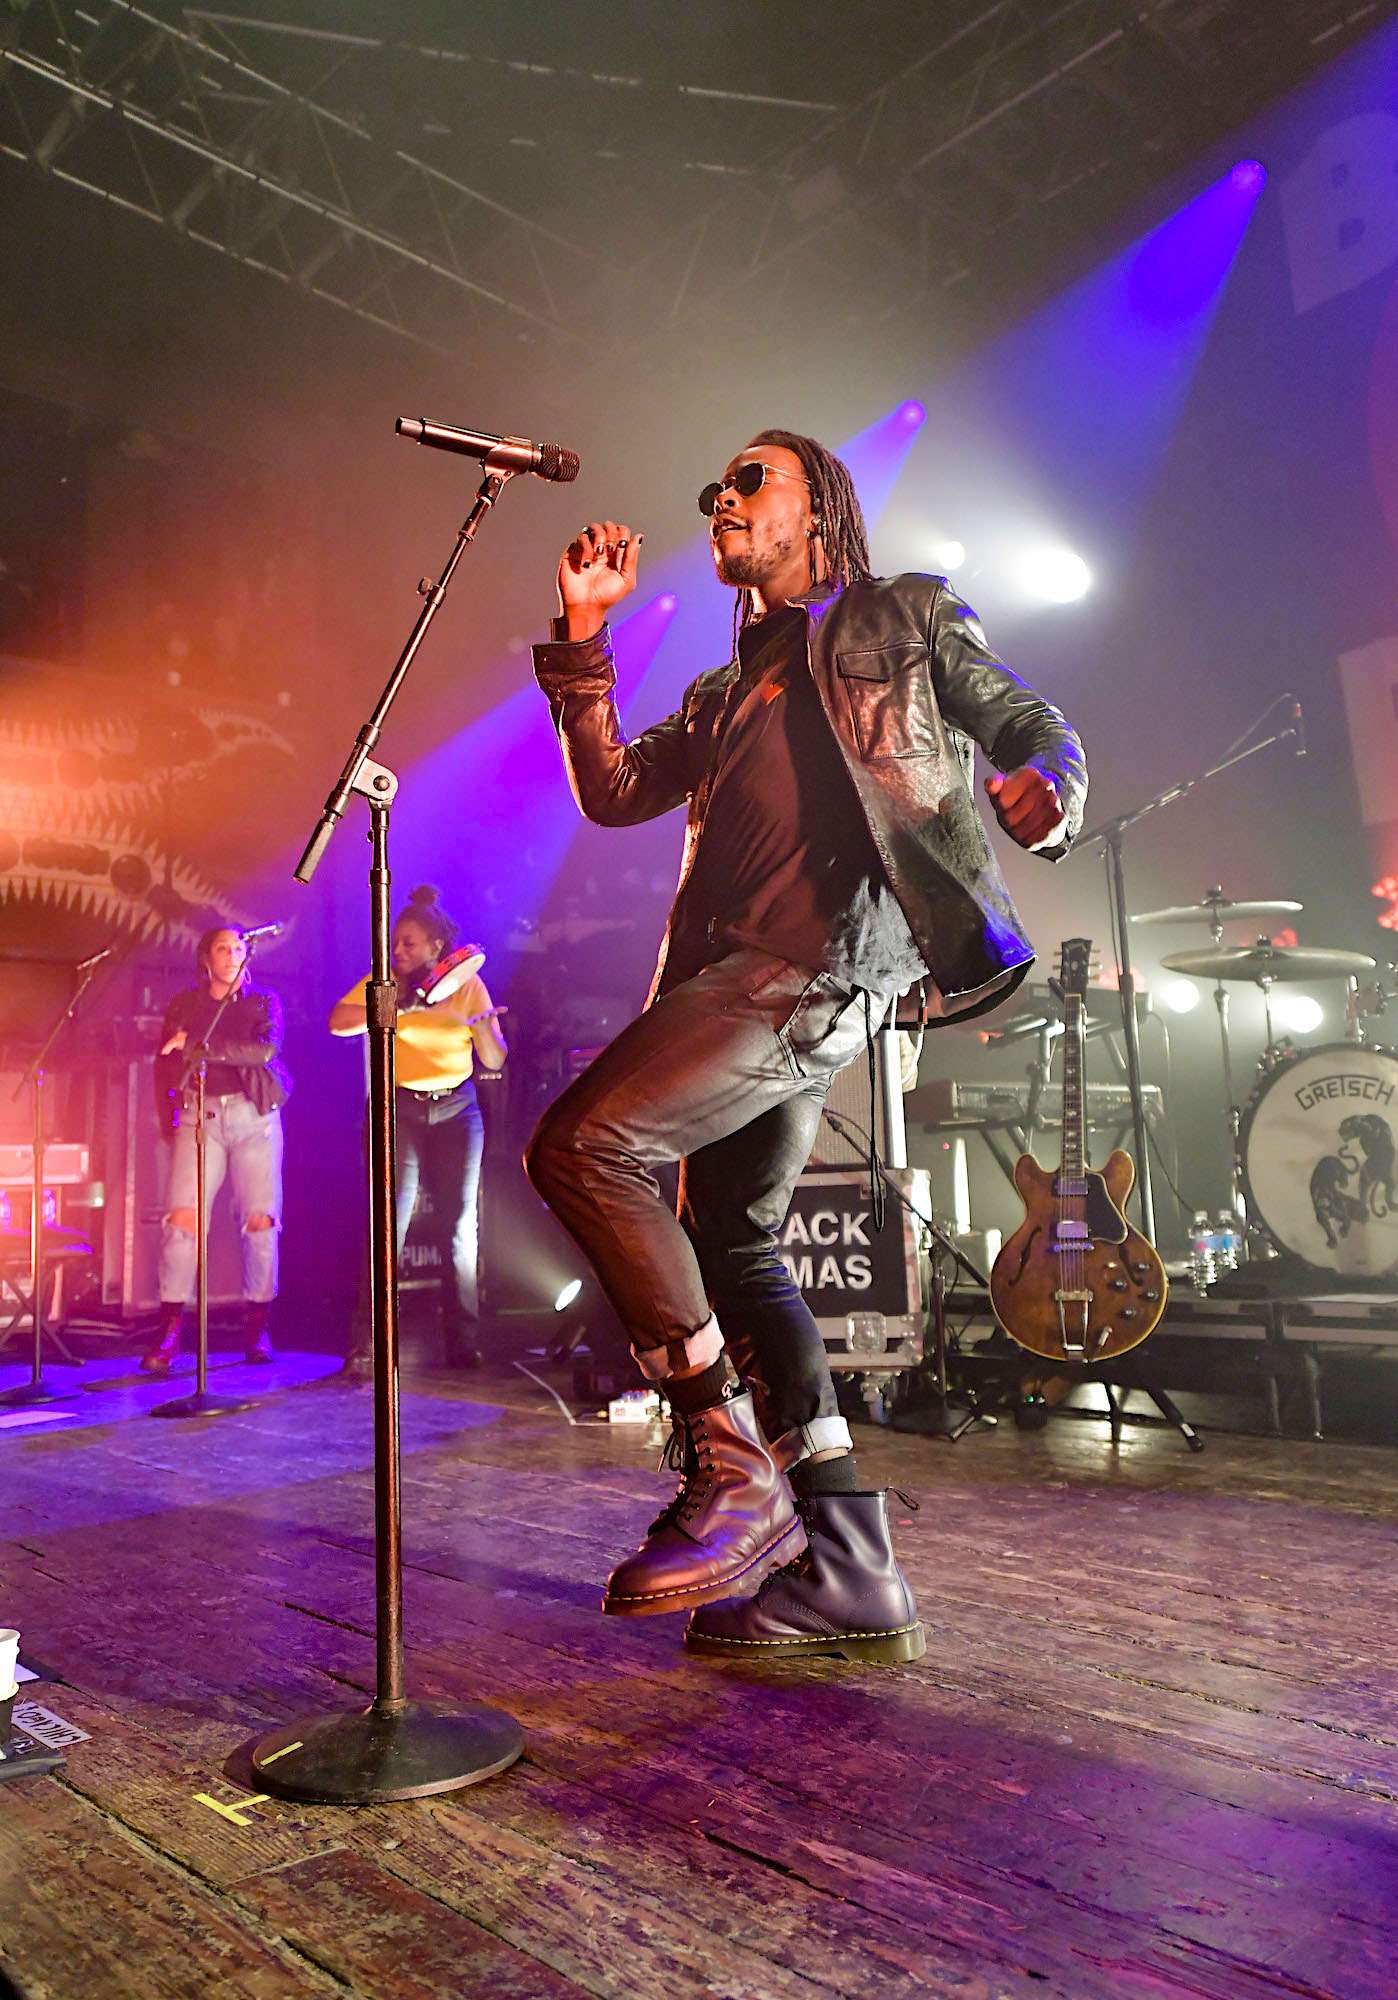 Black Pumas Live at House of Blues [GALLERY] 4